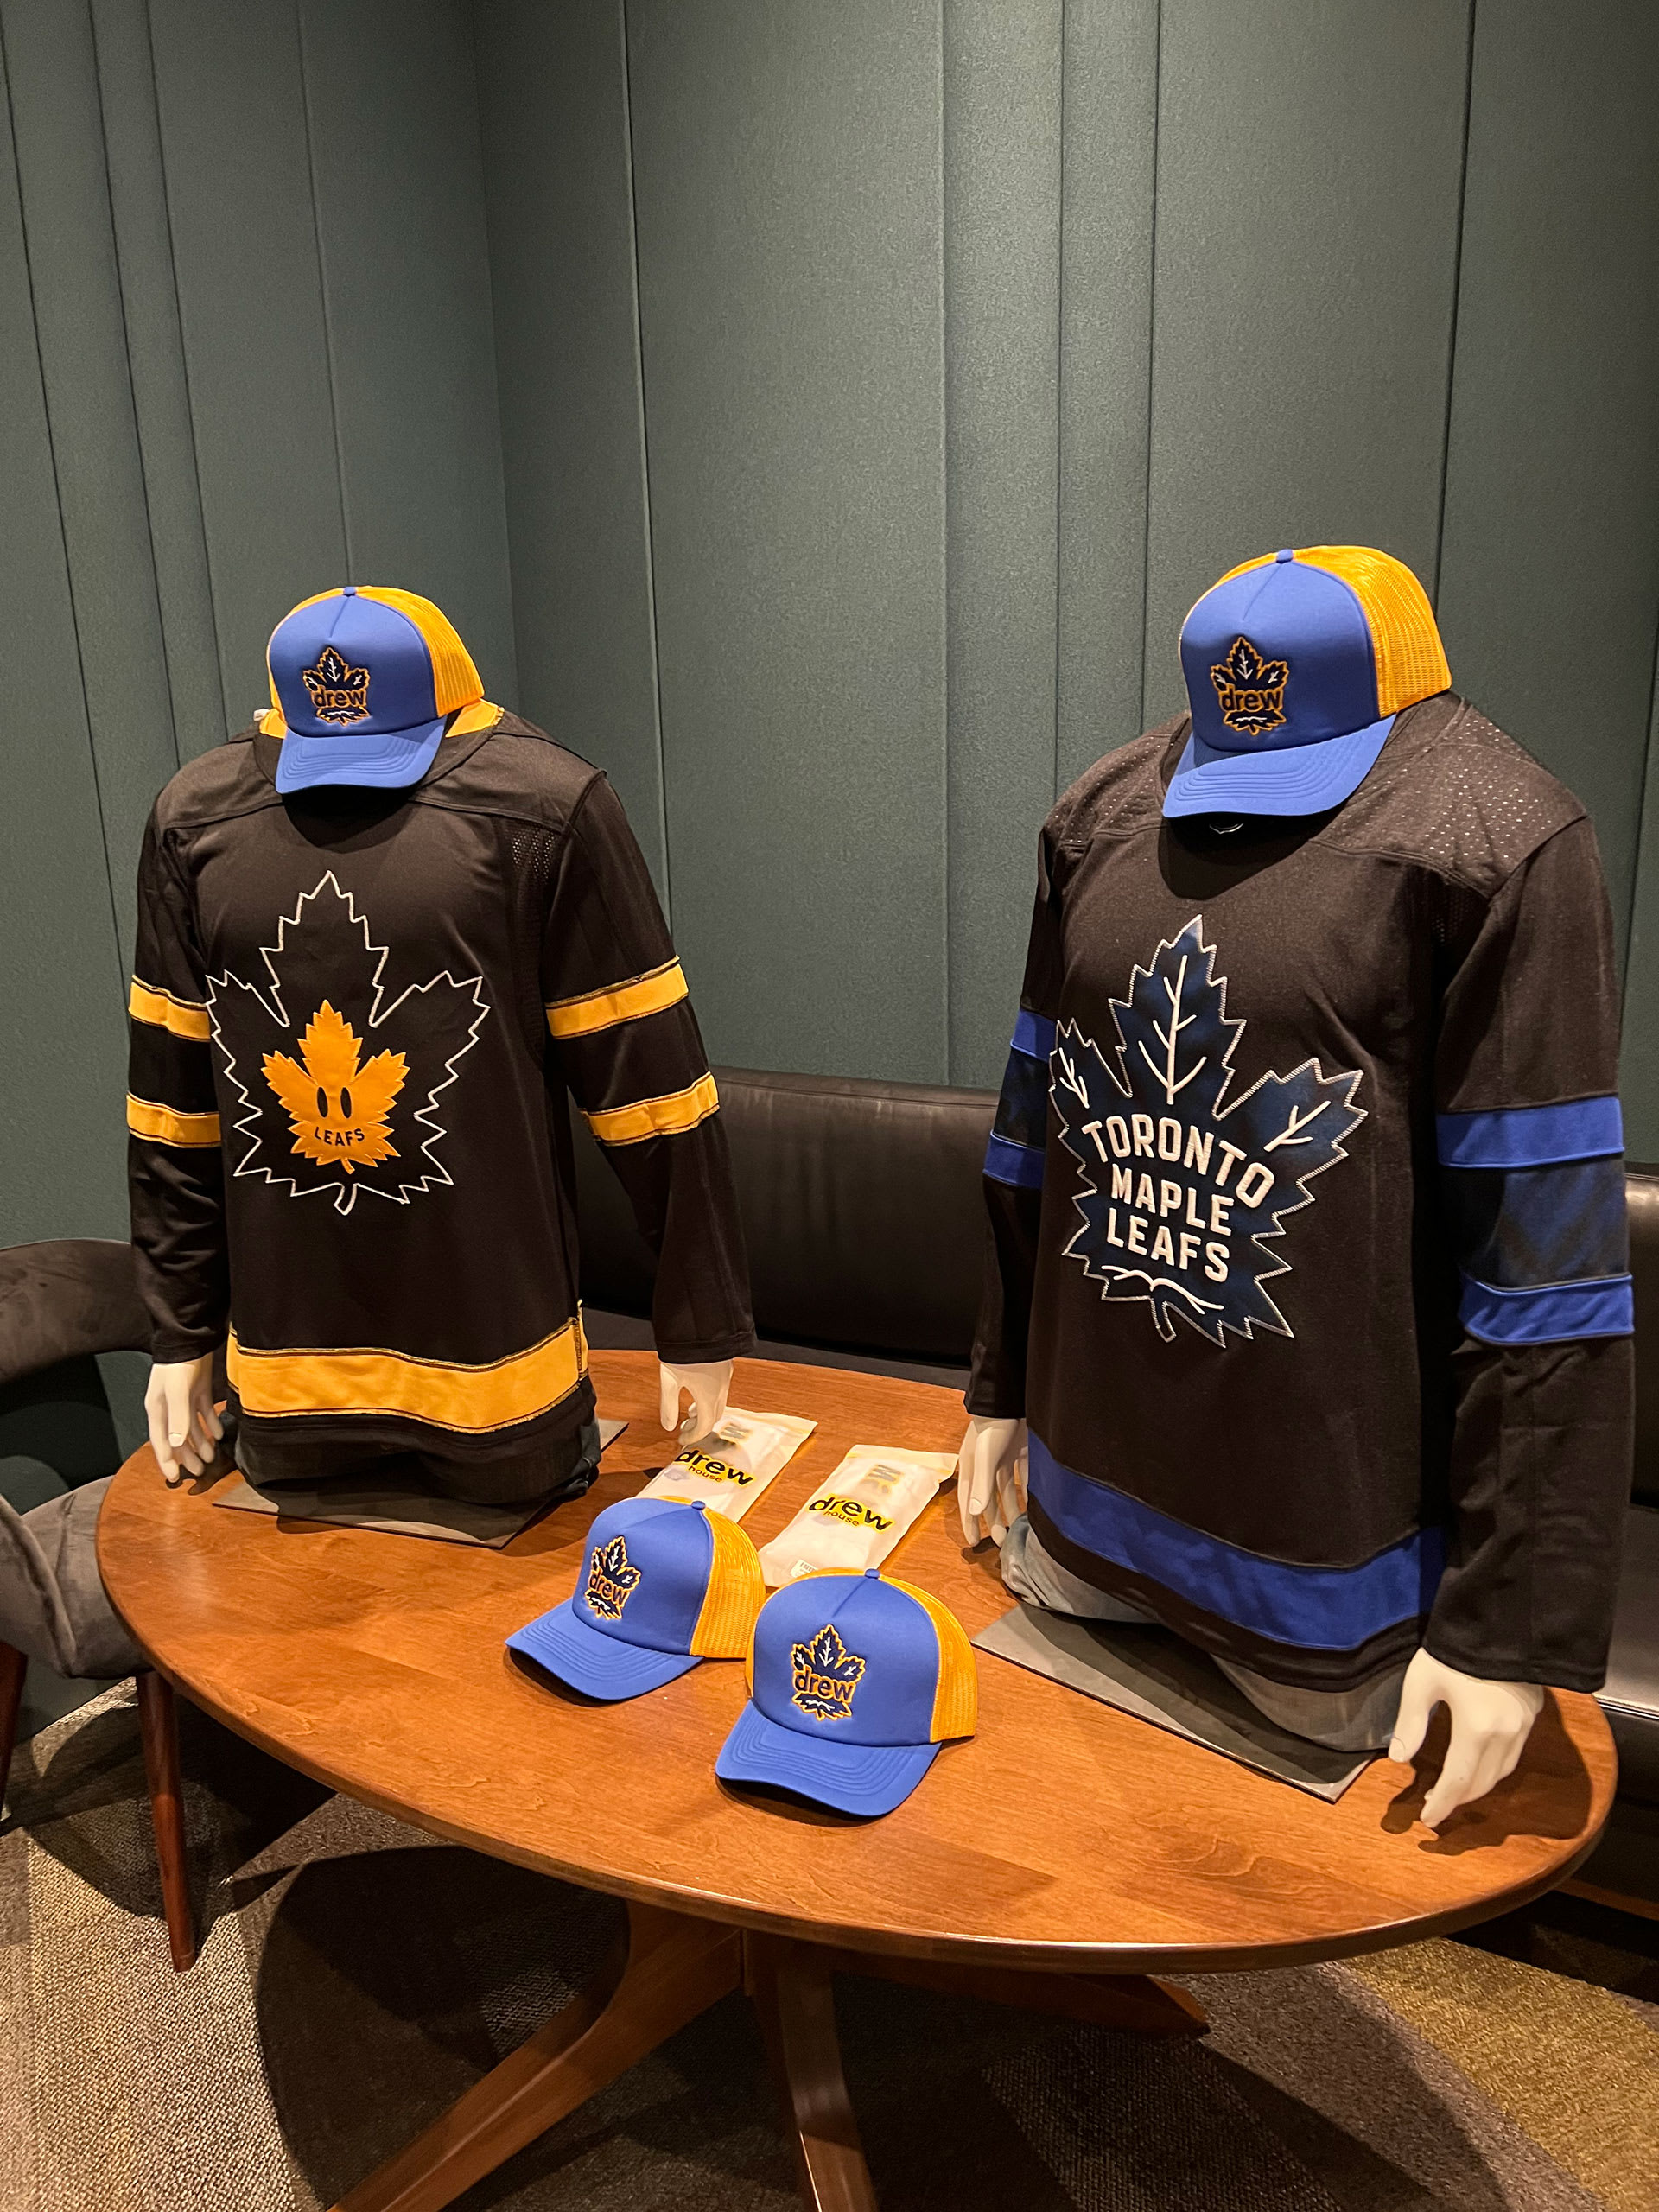 Bieber and the Leafs Drew House collab jersey